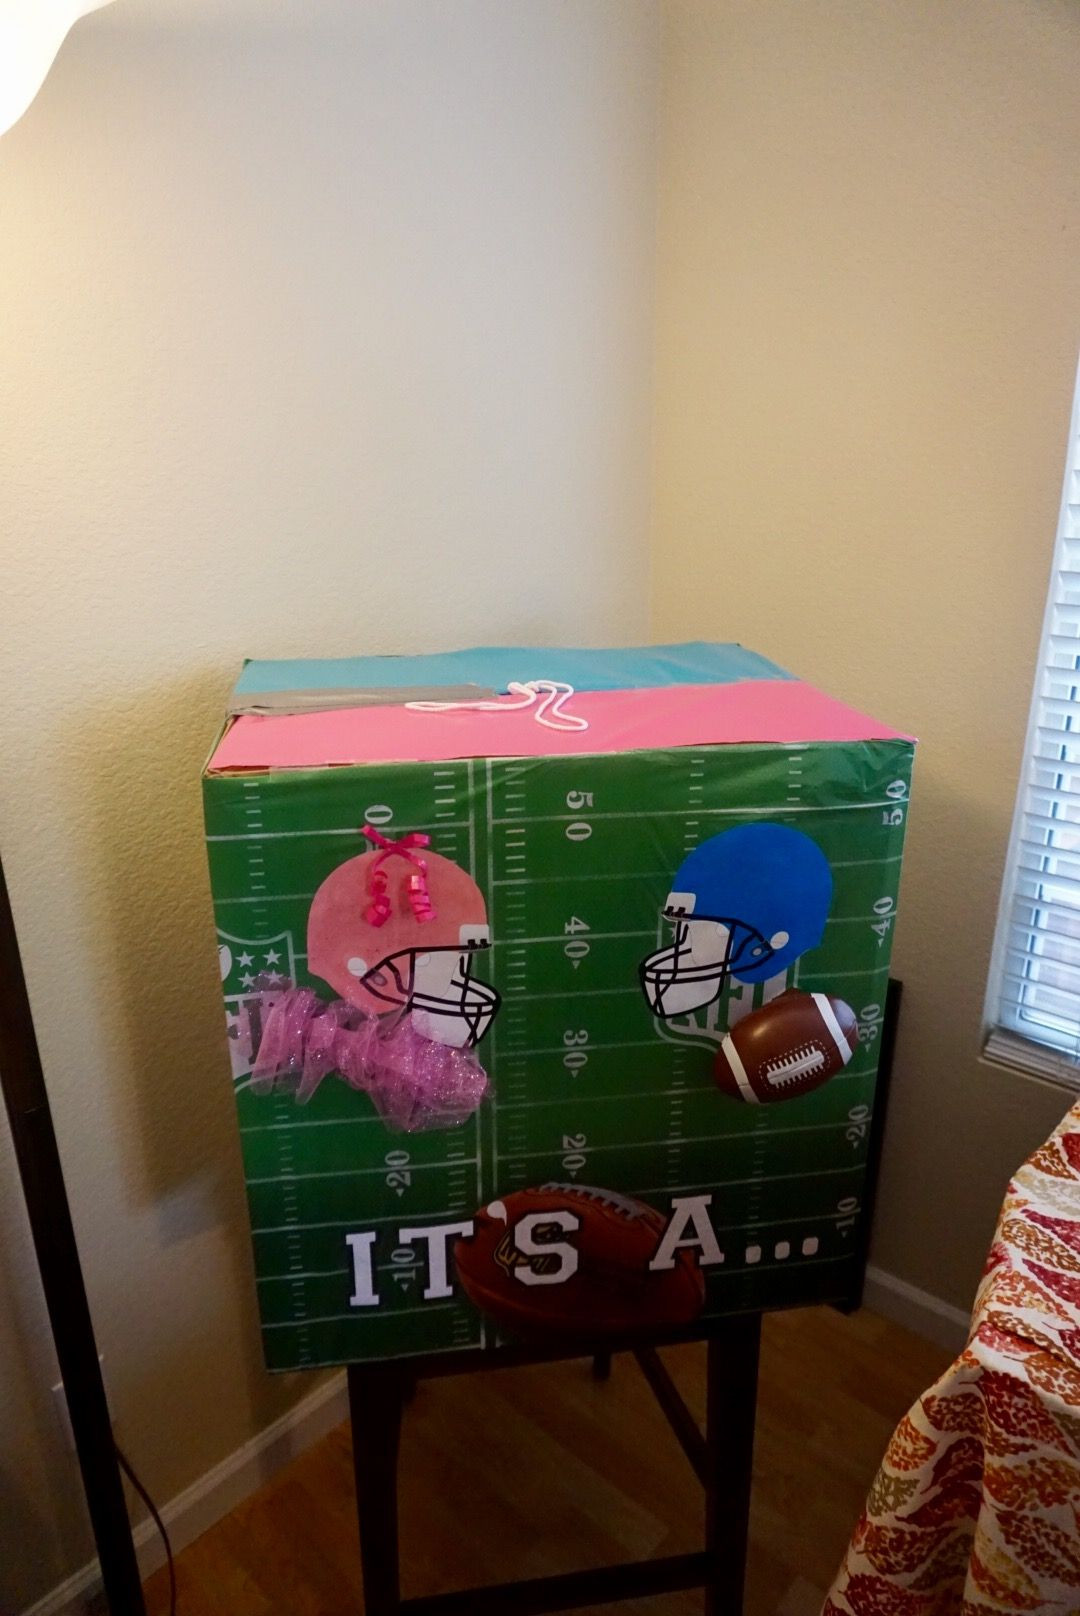 Football Themed Gender Reveal Party Ideas
 Football themed gender reveal box